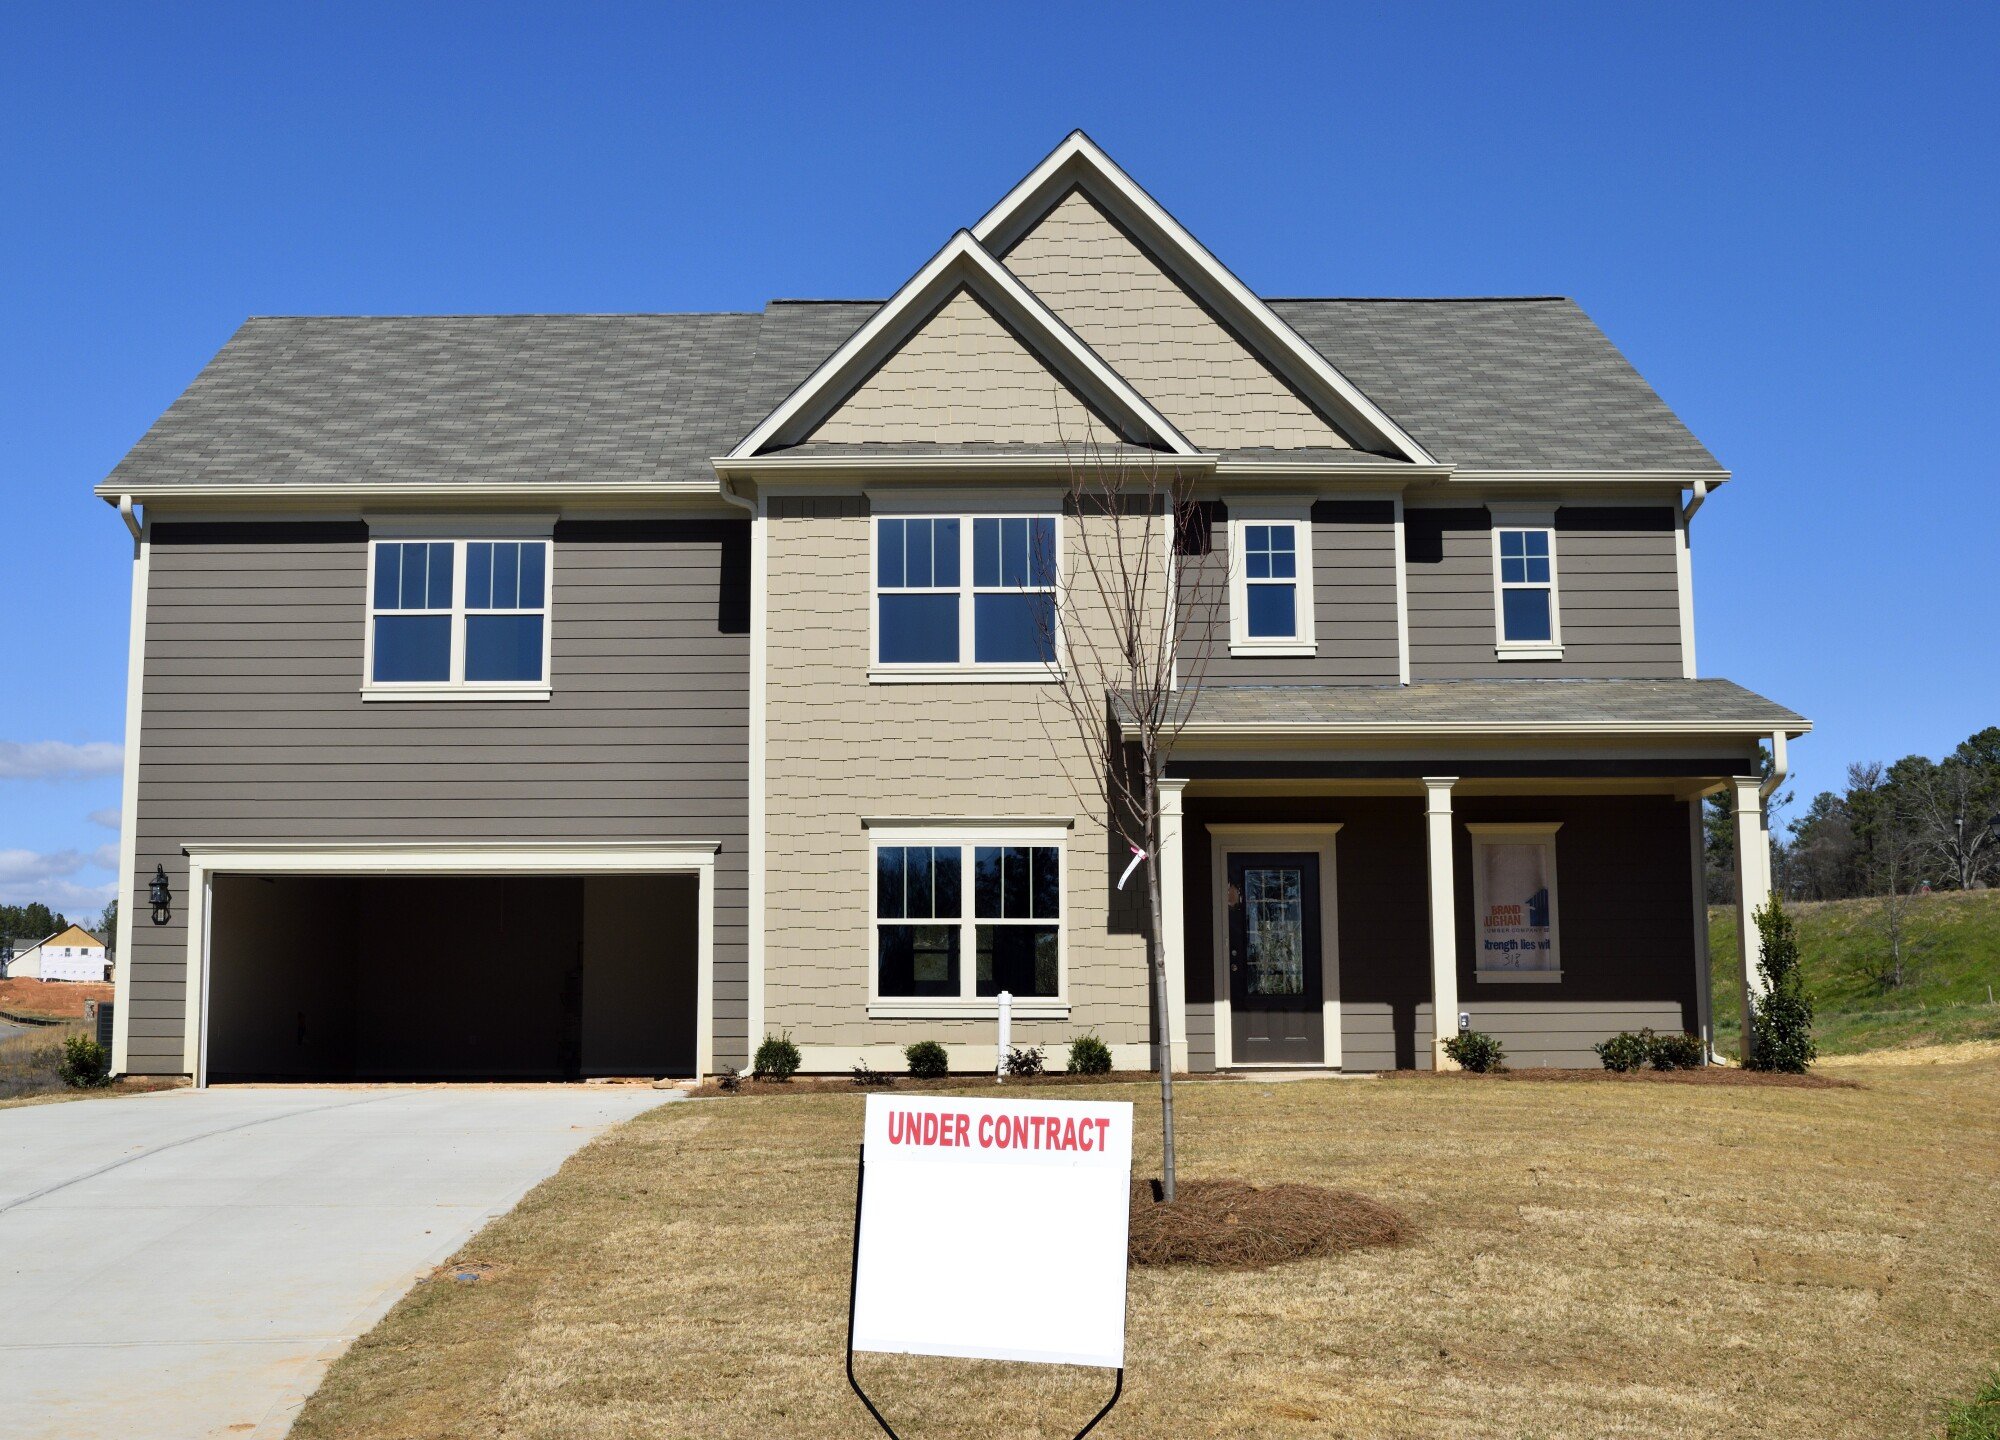 New Construction Homes: What to Know Before Buying Off the Plan